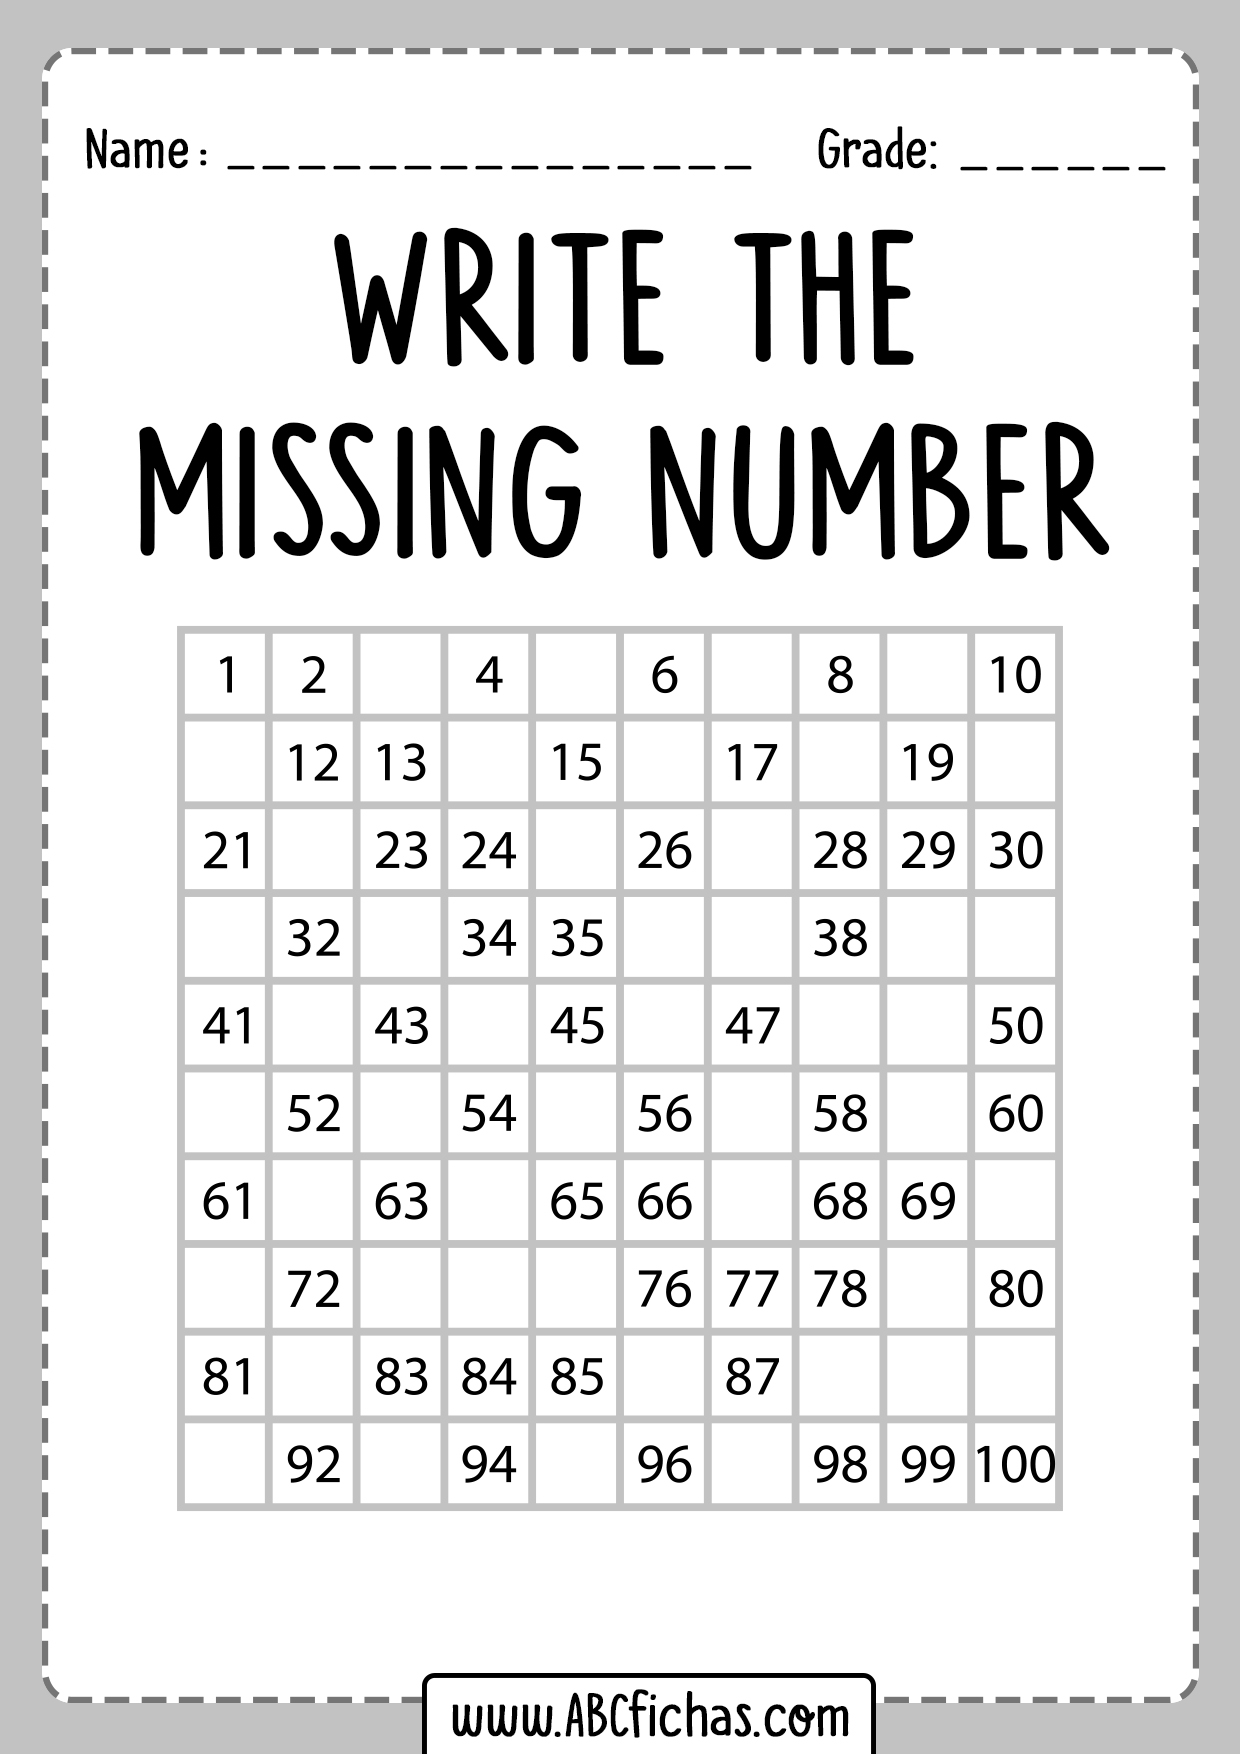 Write the missing number game